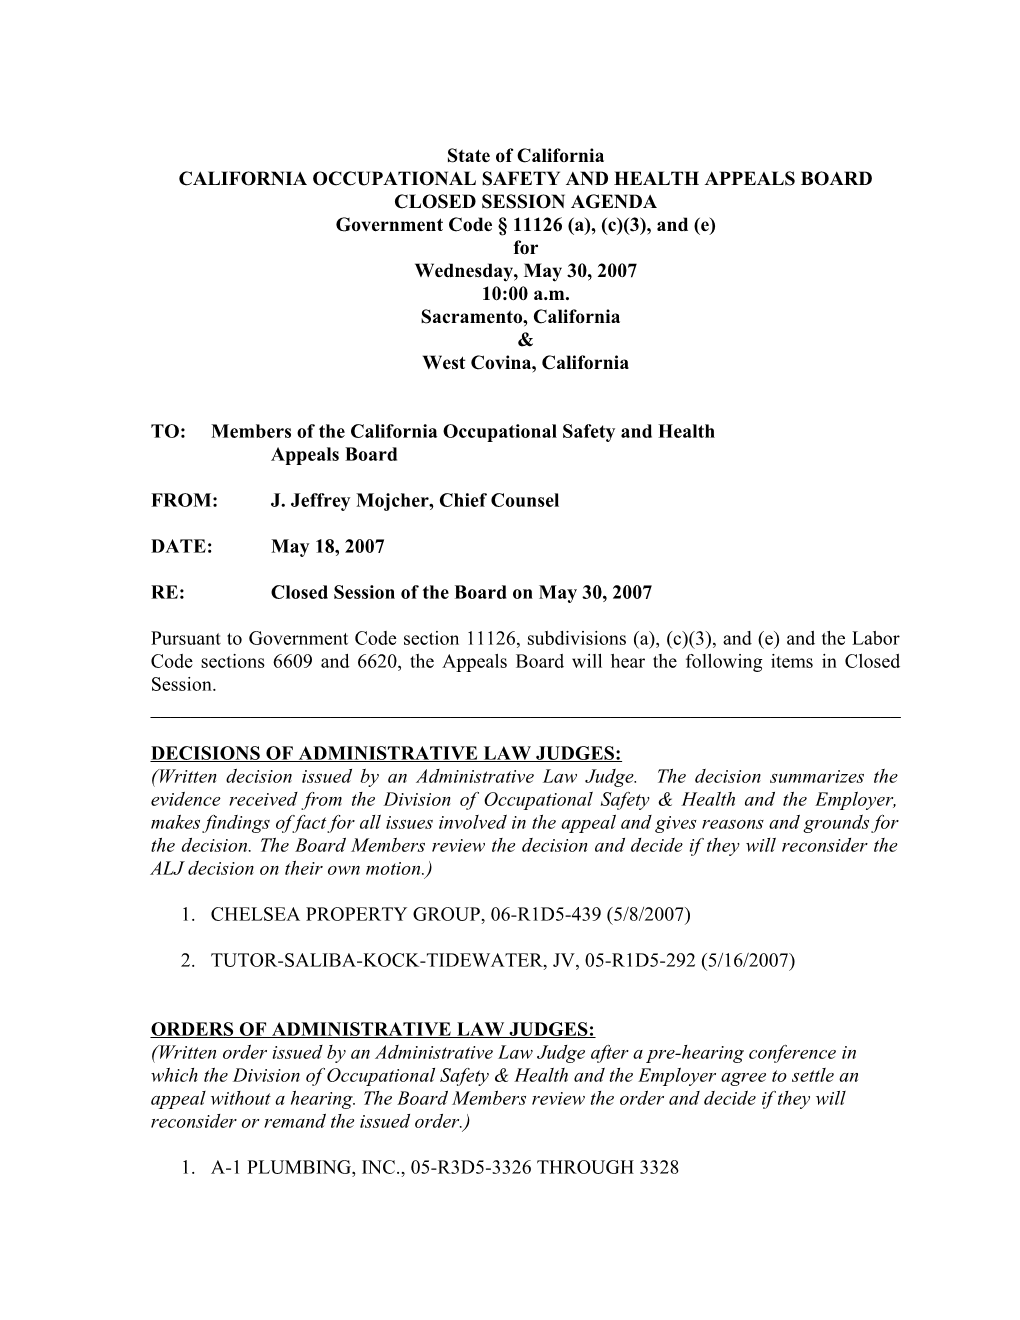 California Occupational Safety & Health Appeals Board s10